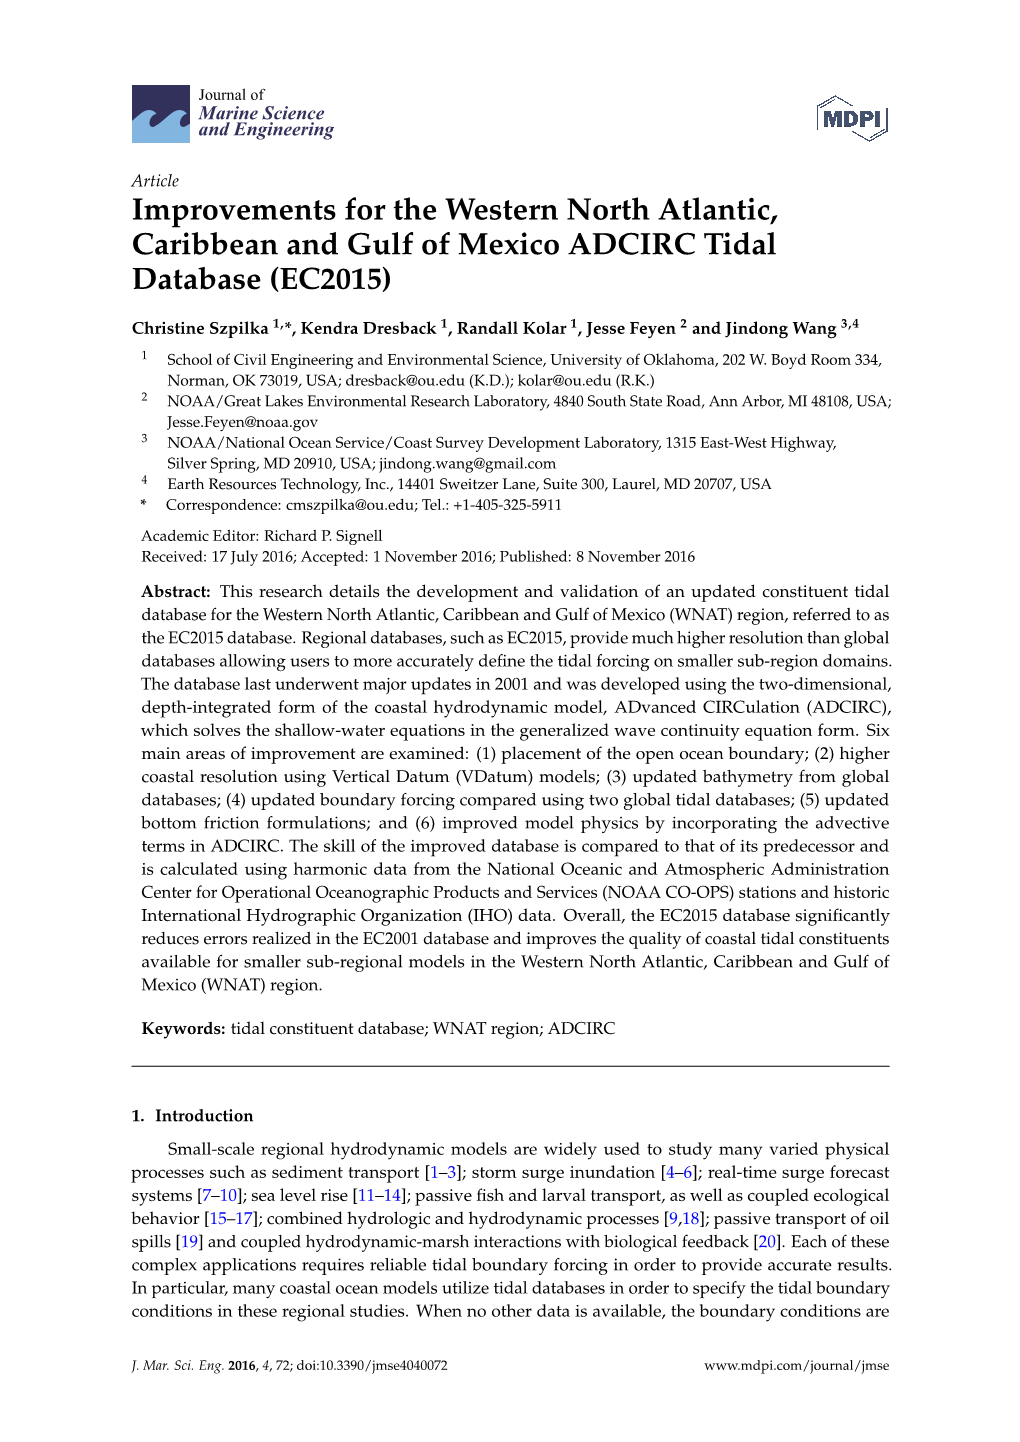 Improvements for the Western North Atlantic, Caribbean and Gulf of Mexico ADCIRC Tidal Database (EC2015)